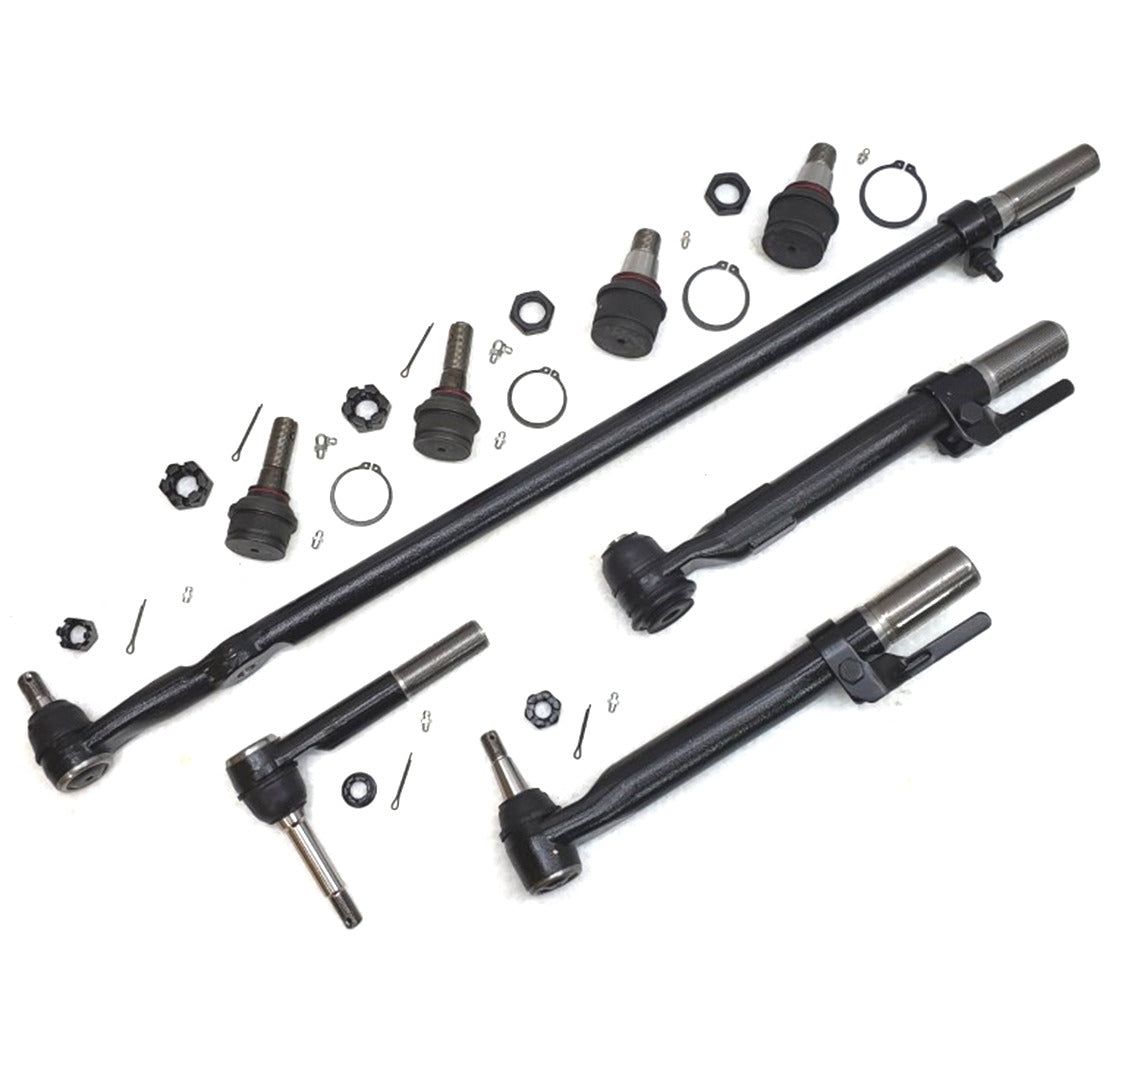 HD Ball Joint Tie Rod Drag Link Steering Kit for 2008-2010 Ford F250 F350 Super Duty 4x4